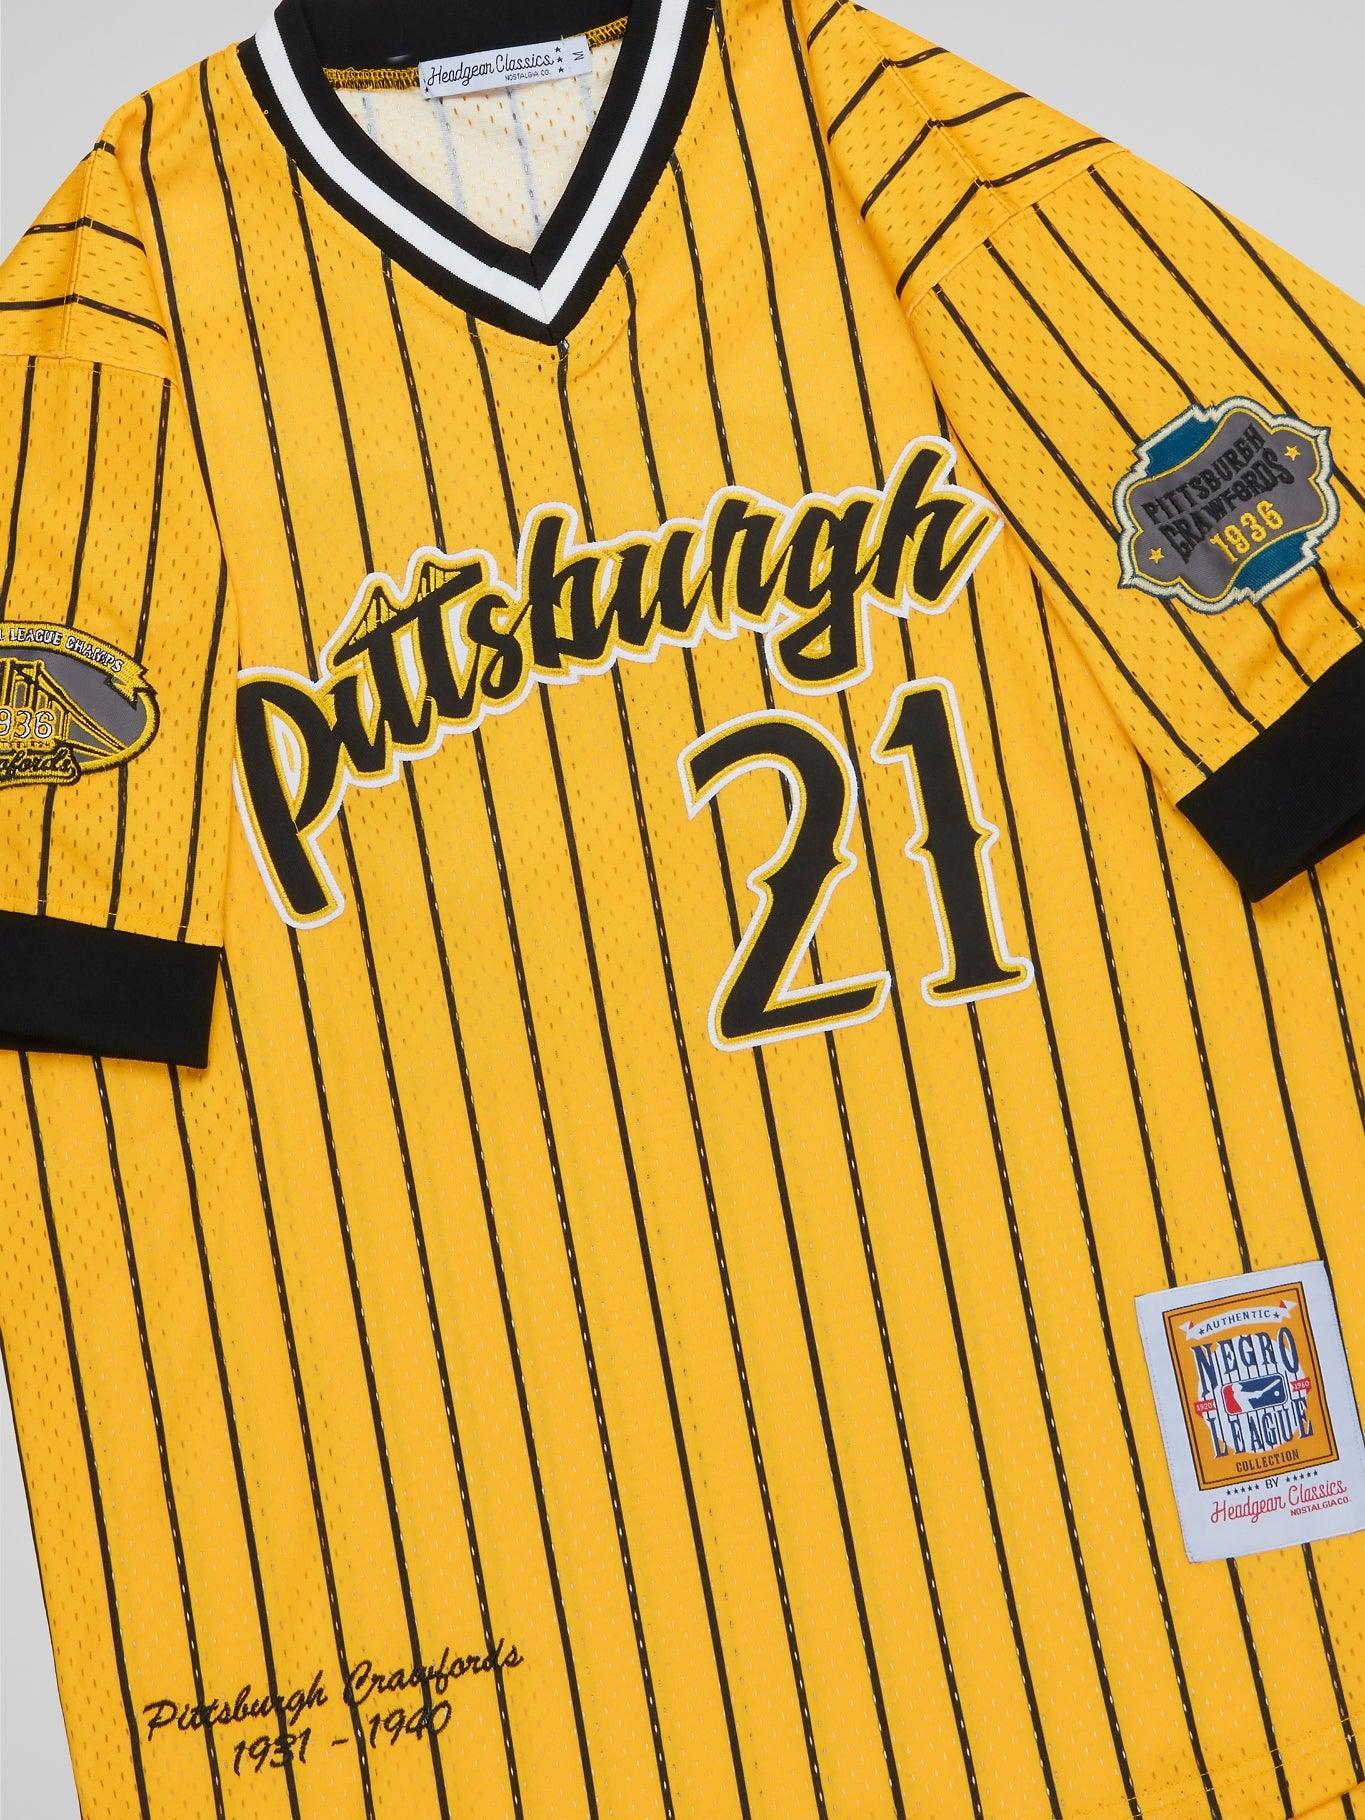 Headgear - Pittsburgh Crawfords Yellow Pullover Jersey